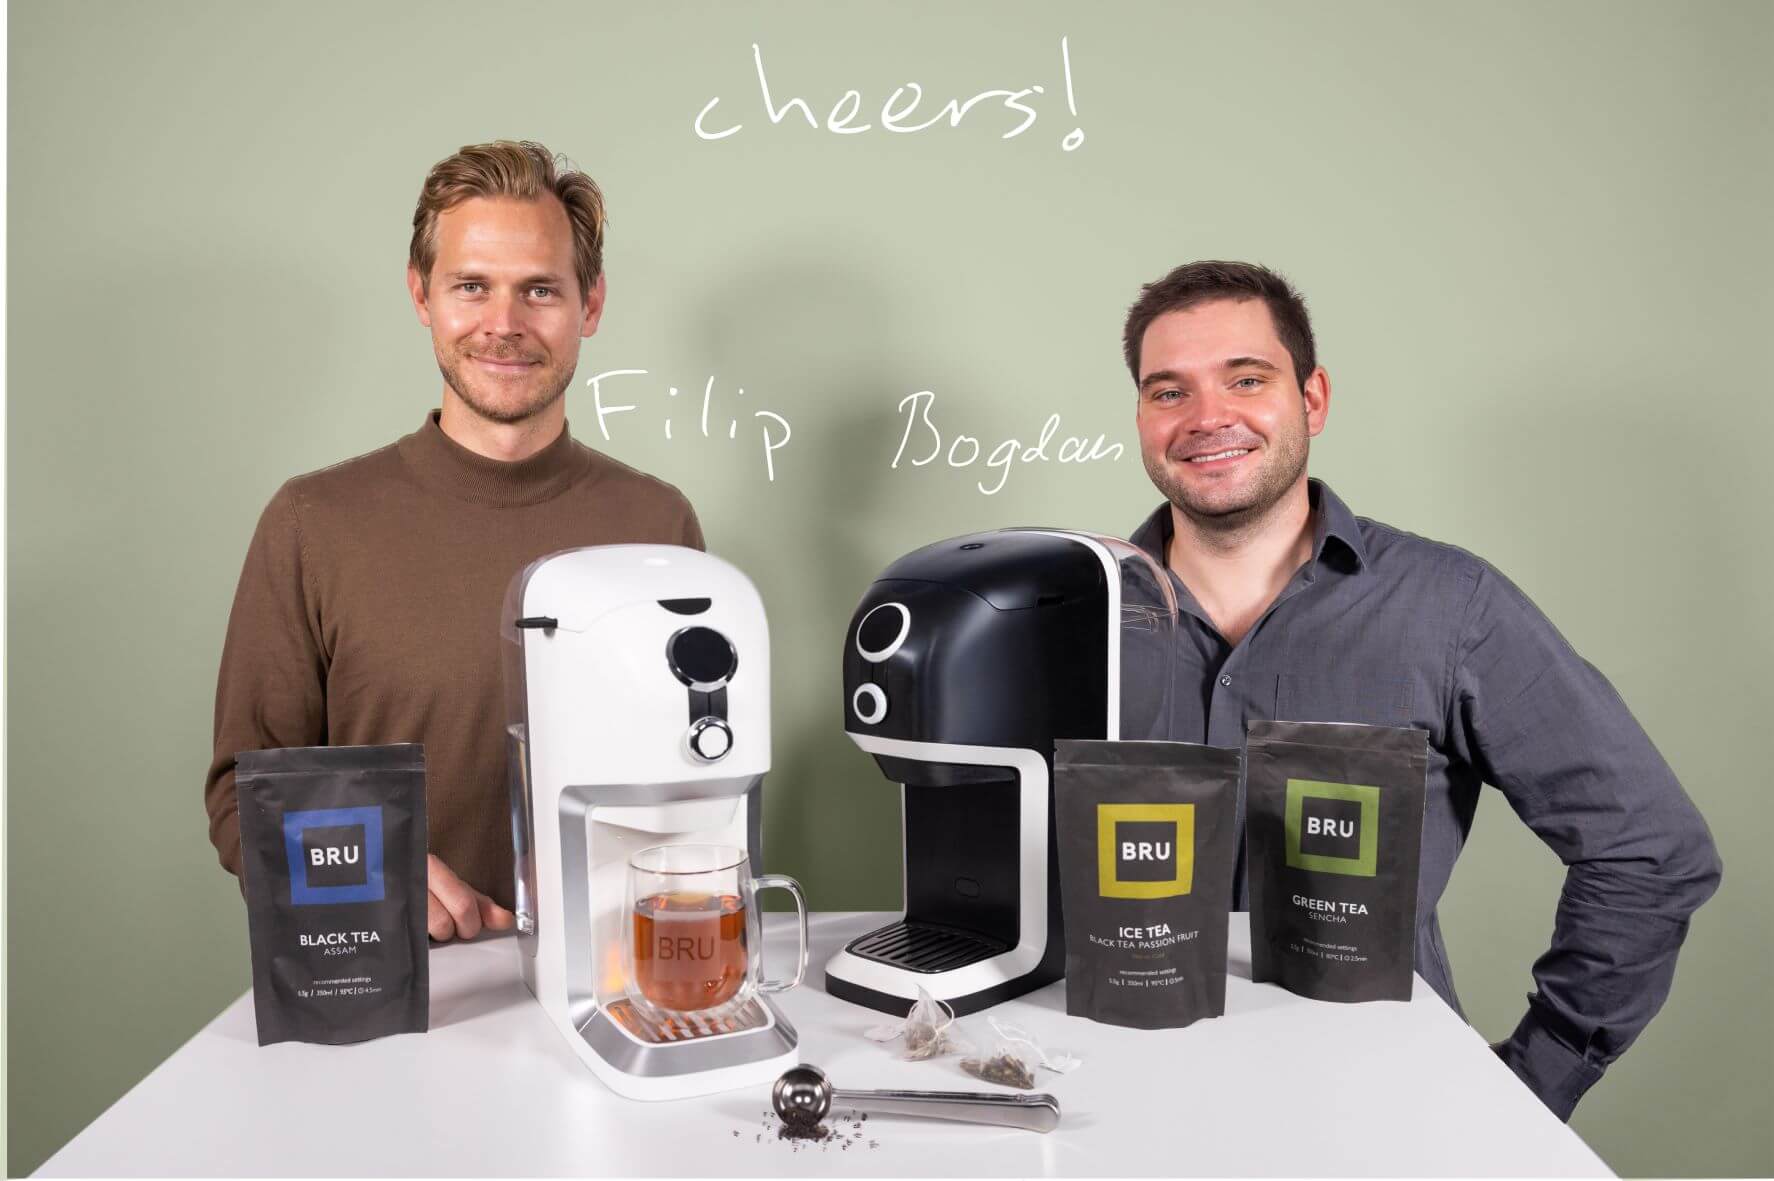 BRU automatic tea maker founders Filip and Bogdan standing behind a table with tea machines and teas